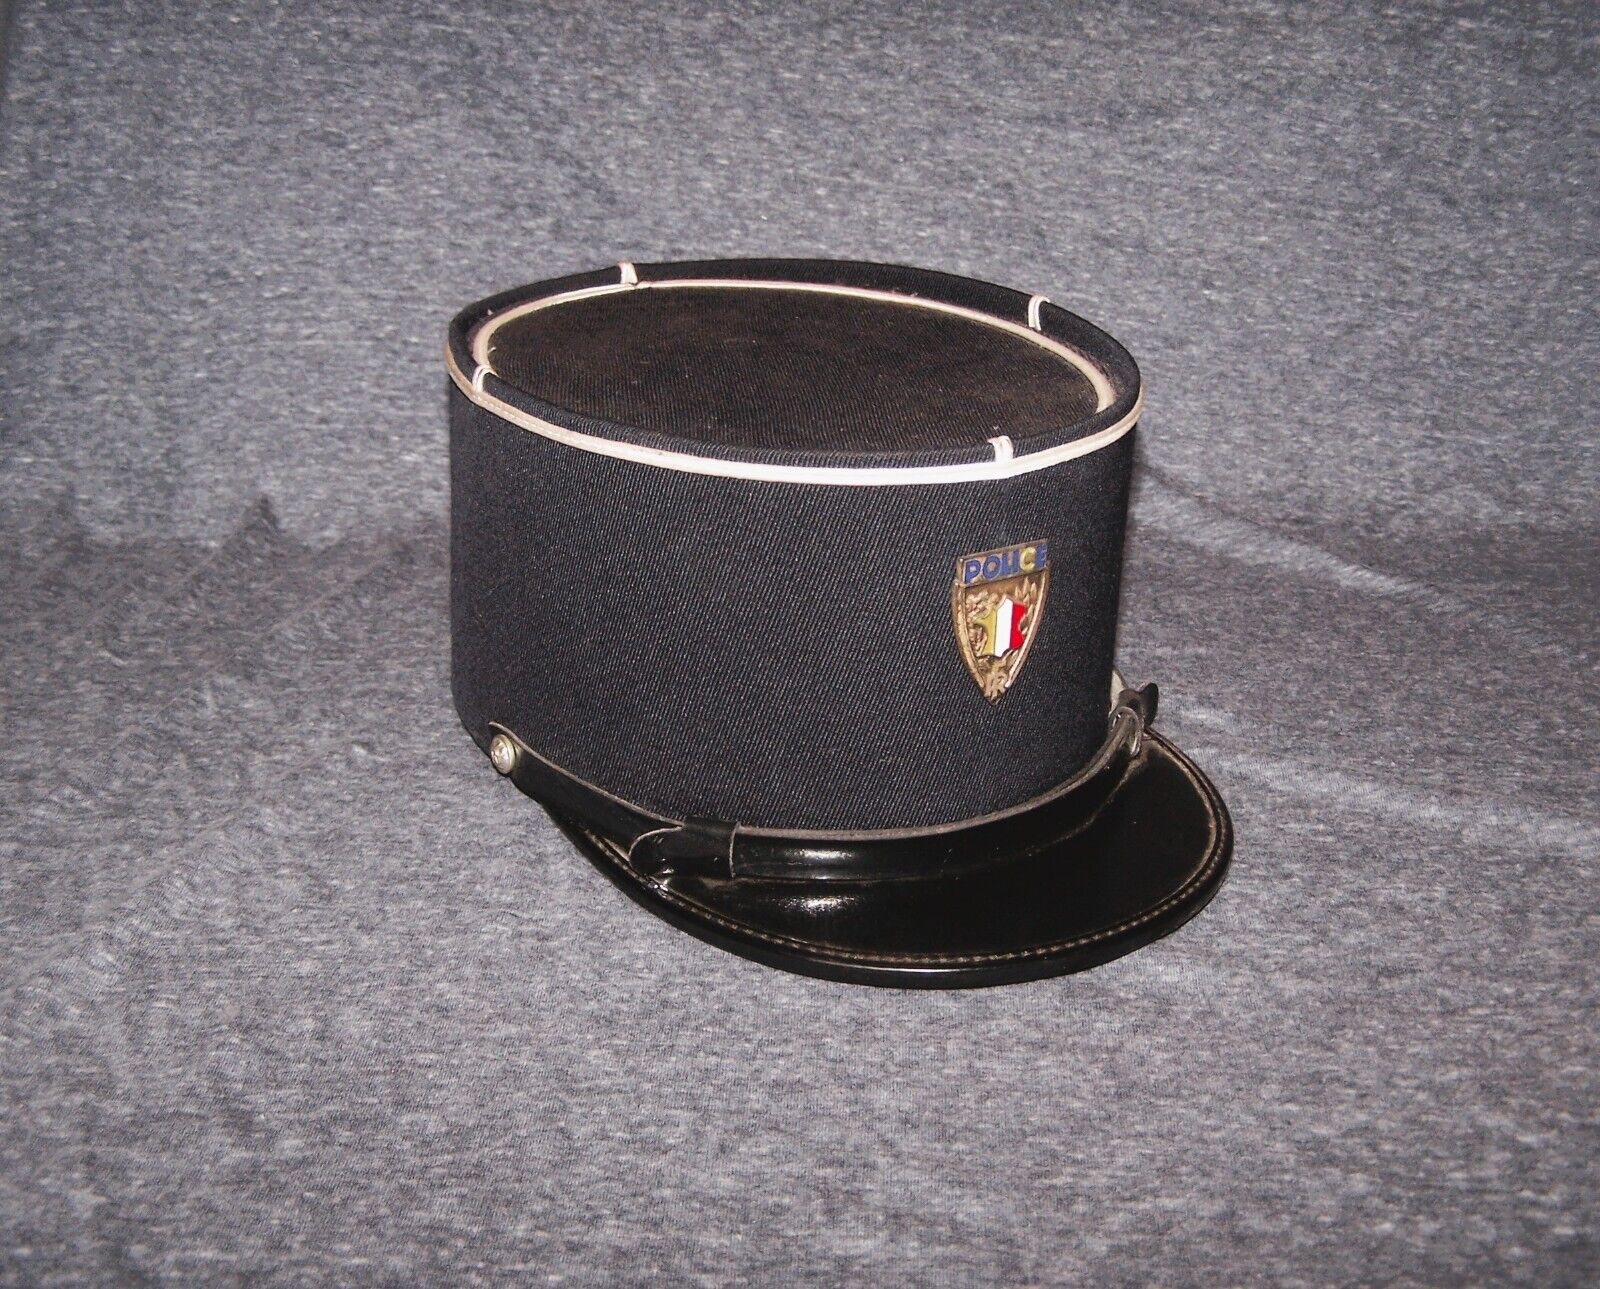 Collectable French Gendarme Kepi Hat In Excellent Condition Size 56.5 = 7  1/4